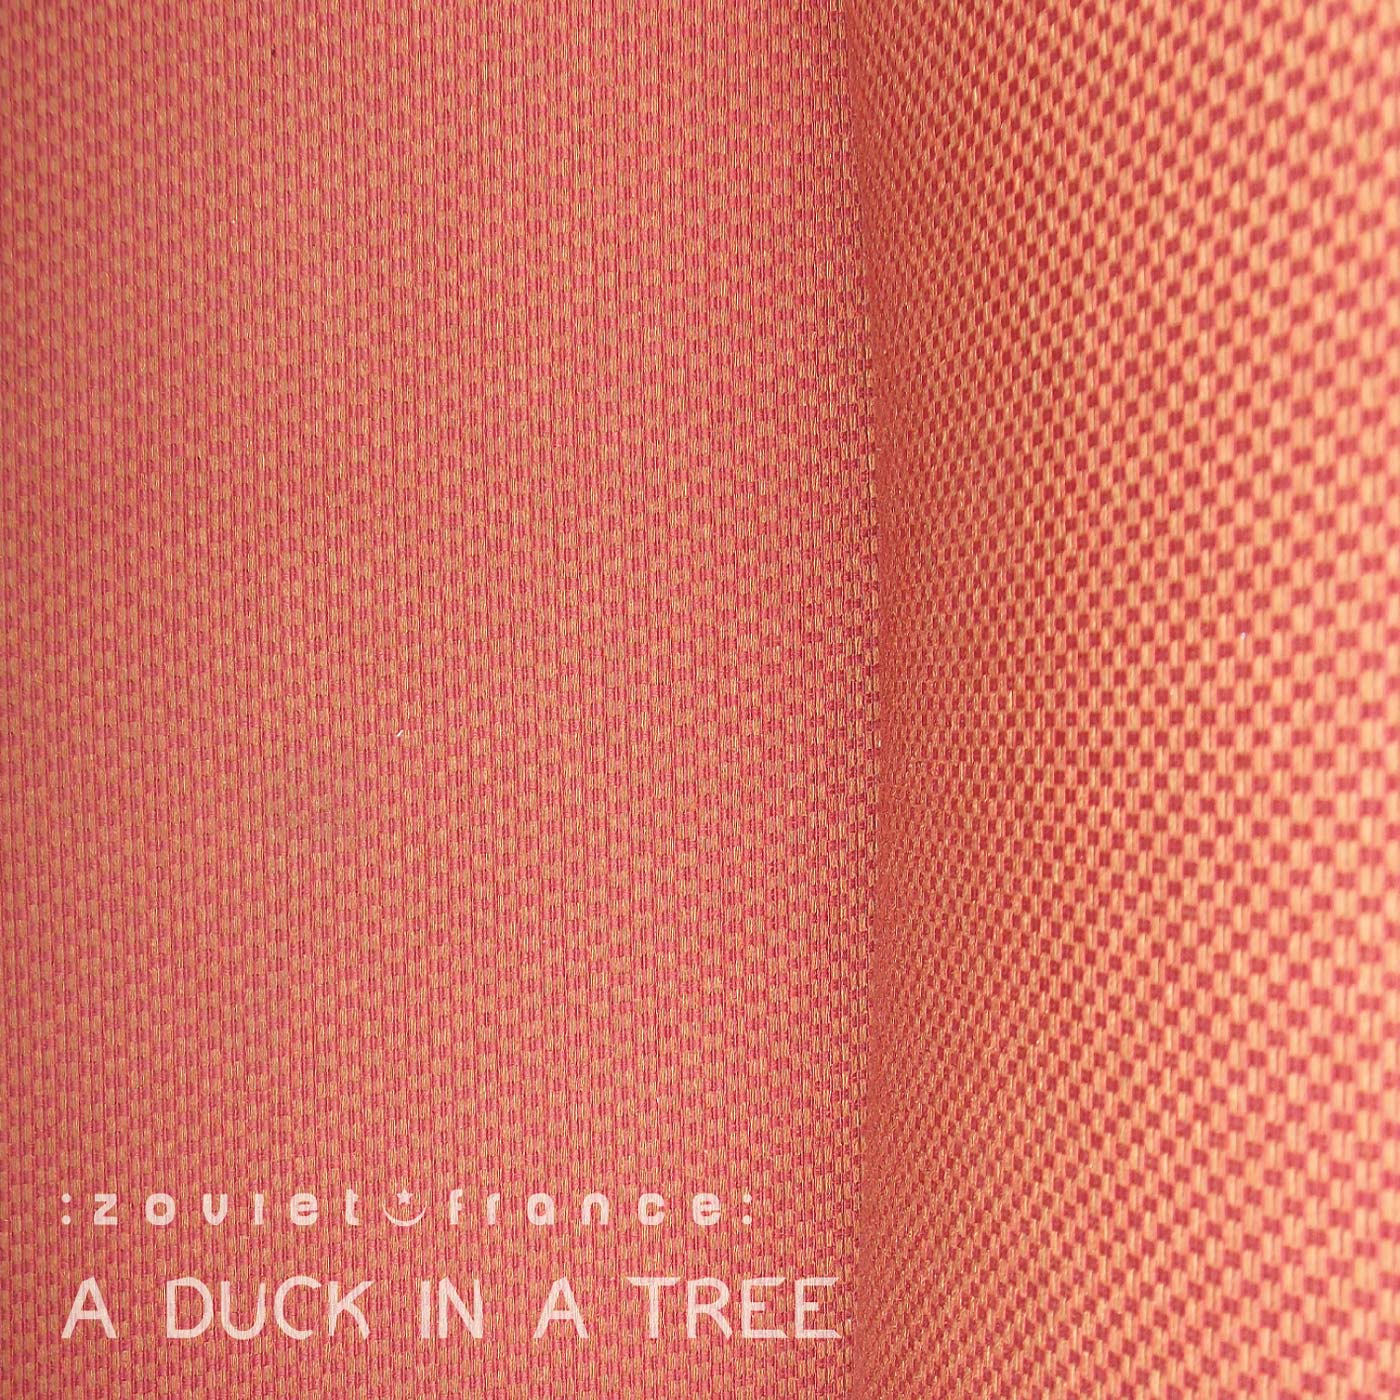 A Duck in a Tree 2014-04-12 | Between the Felt and the Imagined